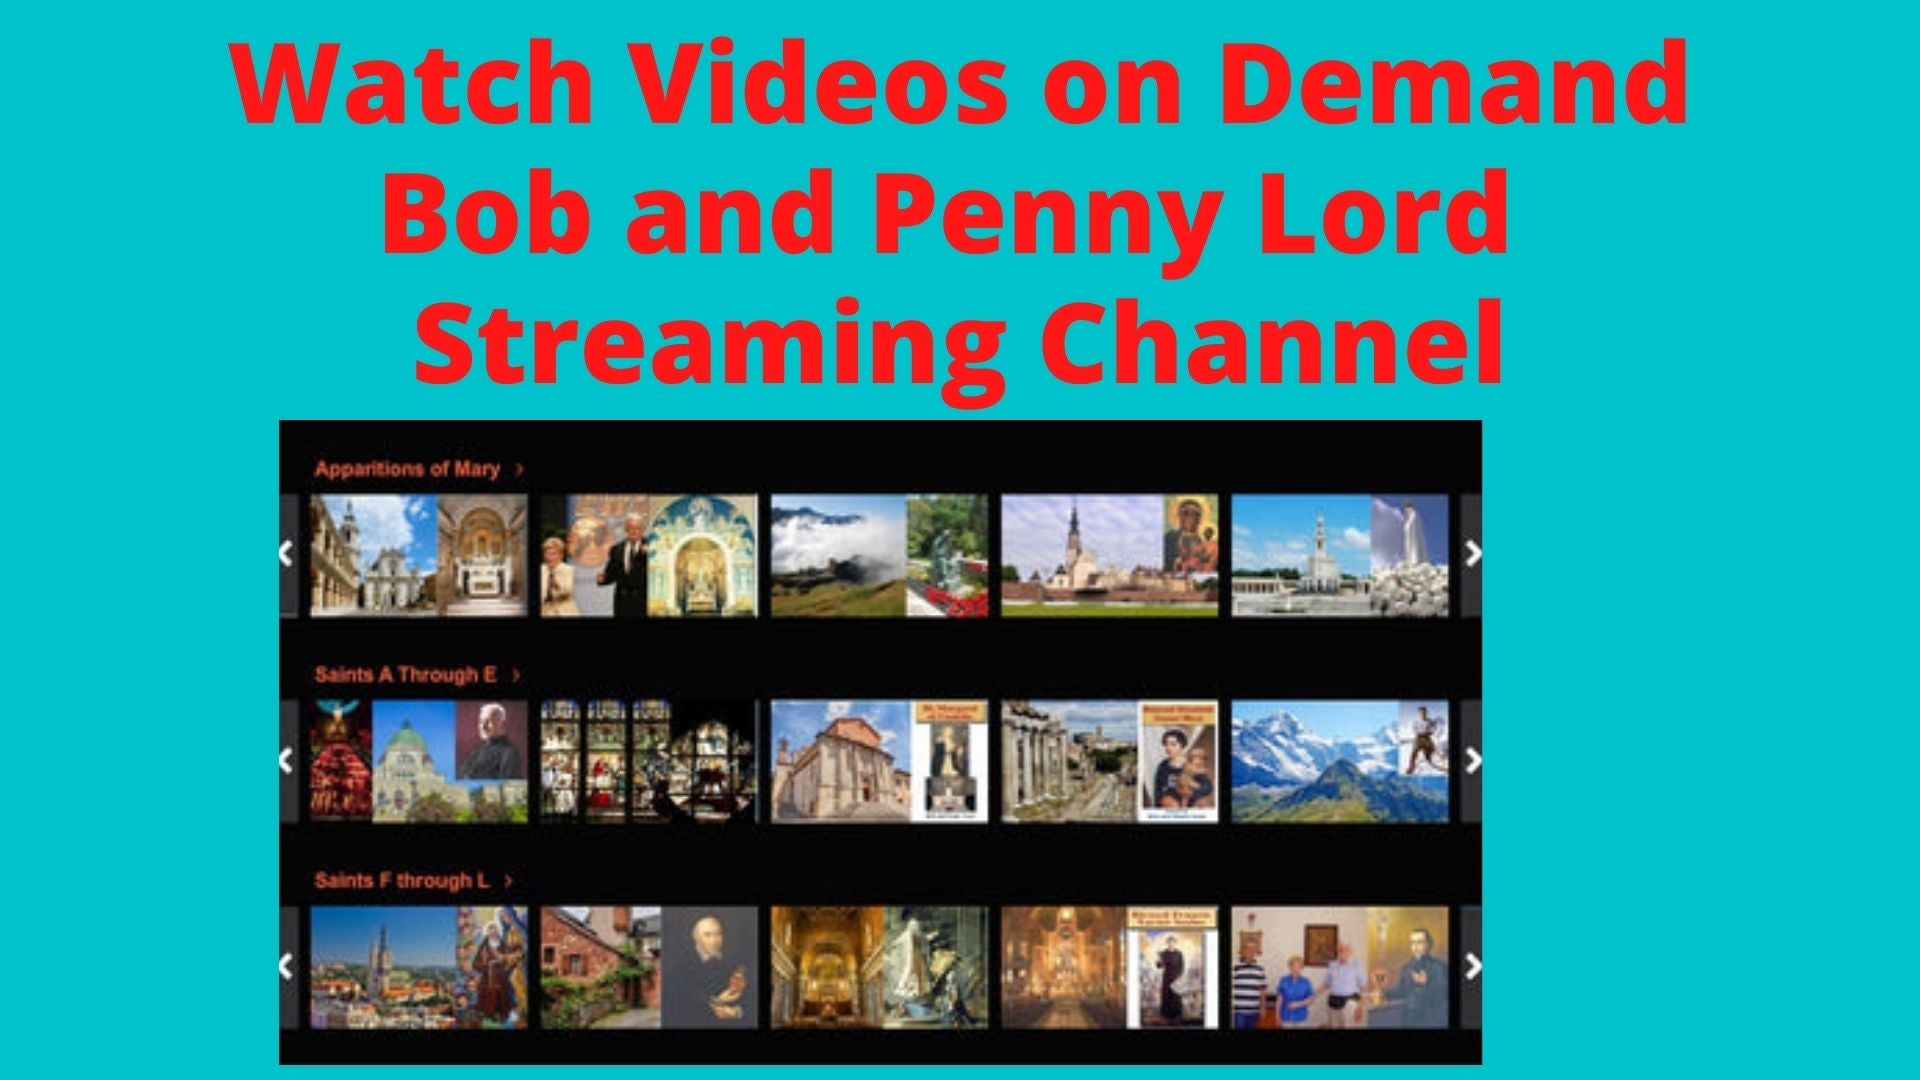 Bob and Penny Lord TV Channel Unlimited Access - Bob and Penny Lord